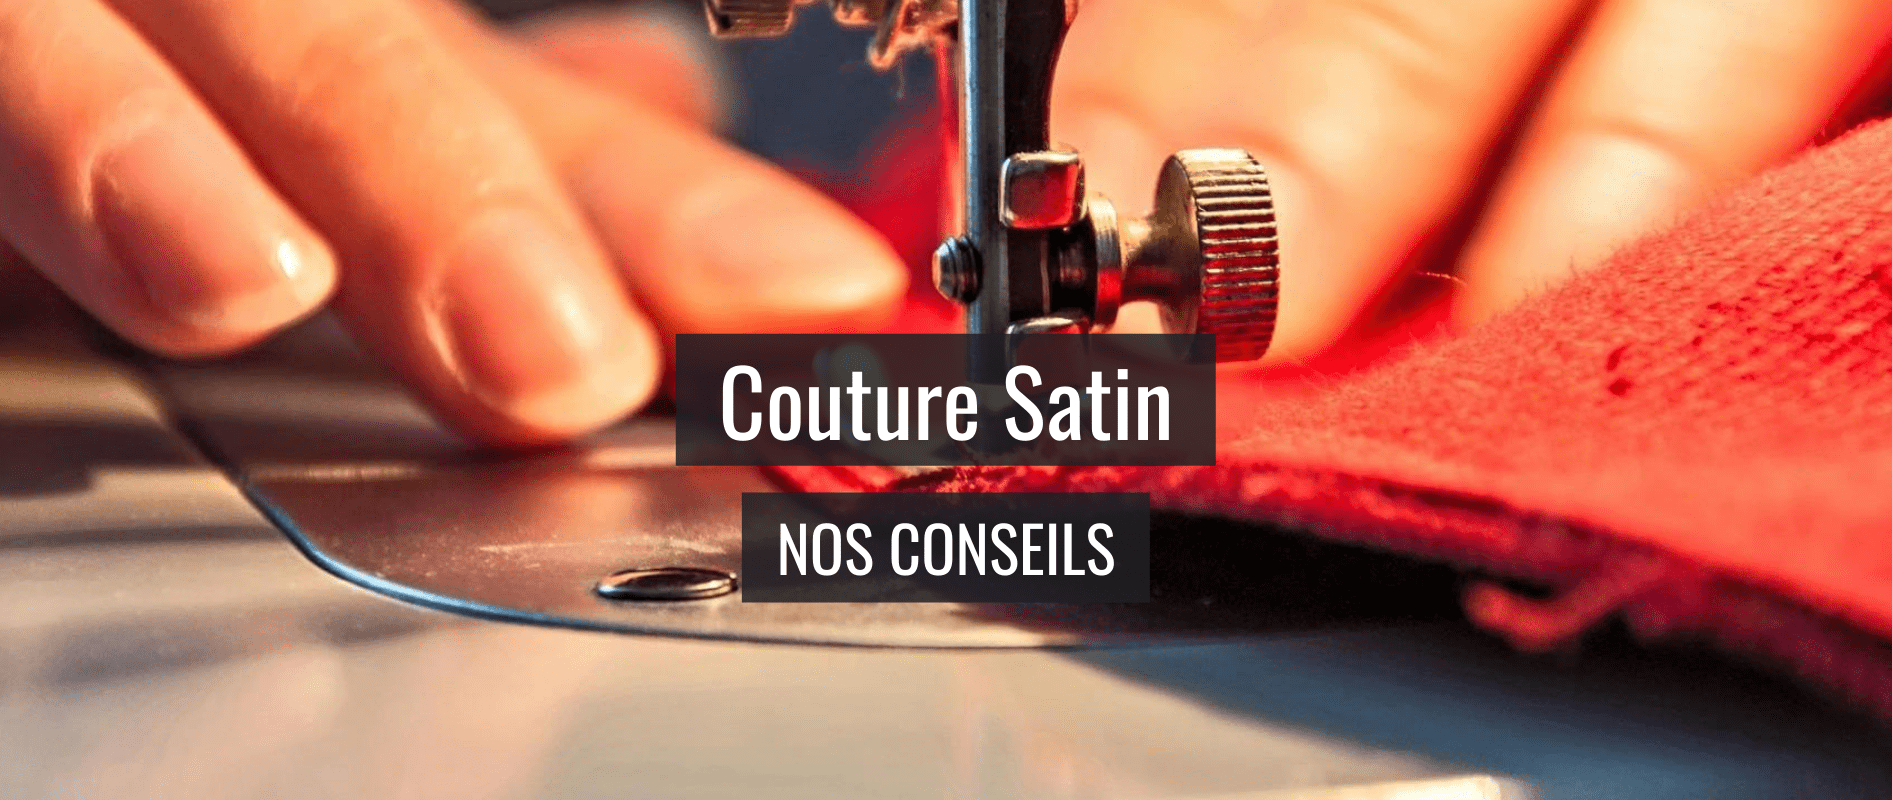 couture satin